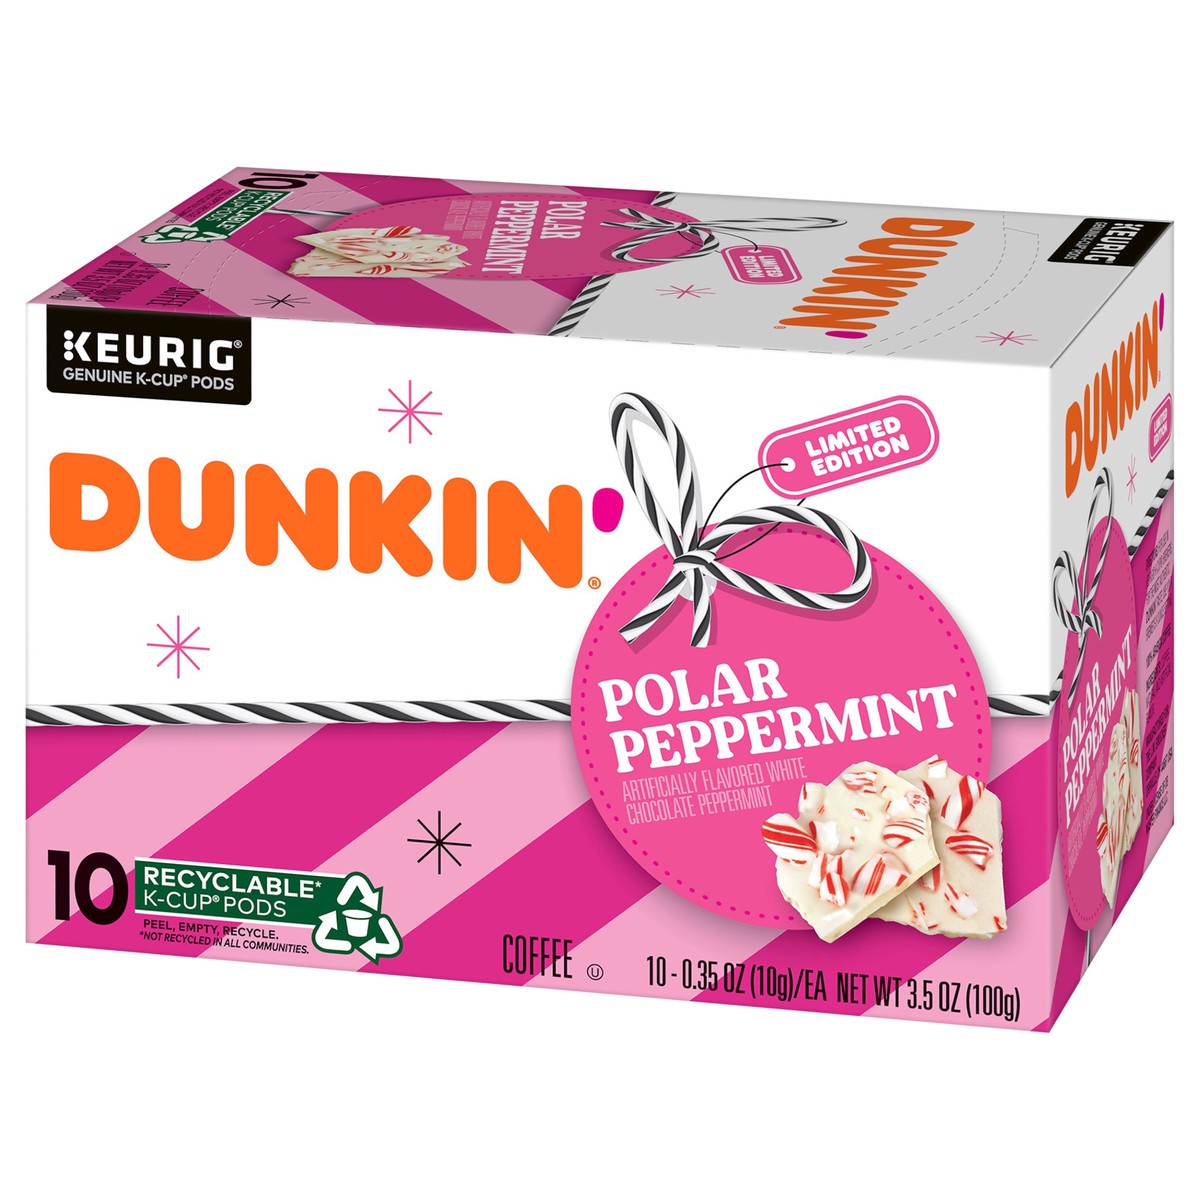 slide 6 of 9, Dunkin' Dunkin Polar Peppermint, Limited Edition Holiday Coffee K-CUP /, 3.7 oz